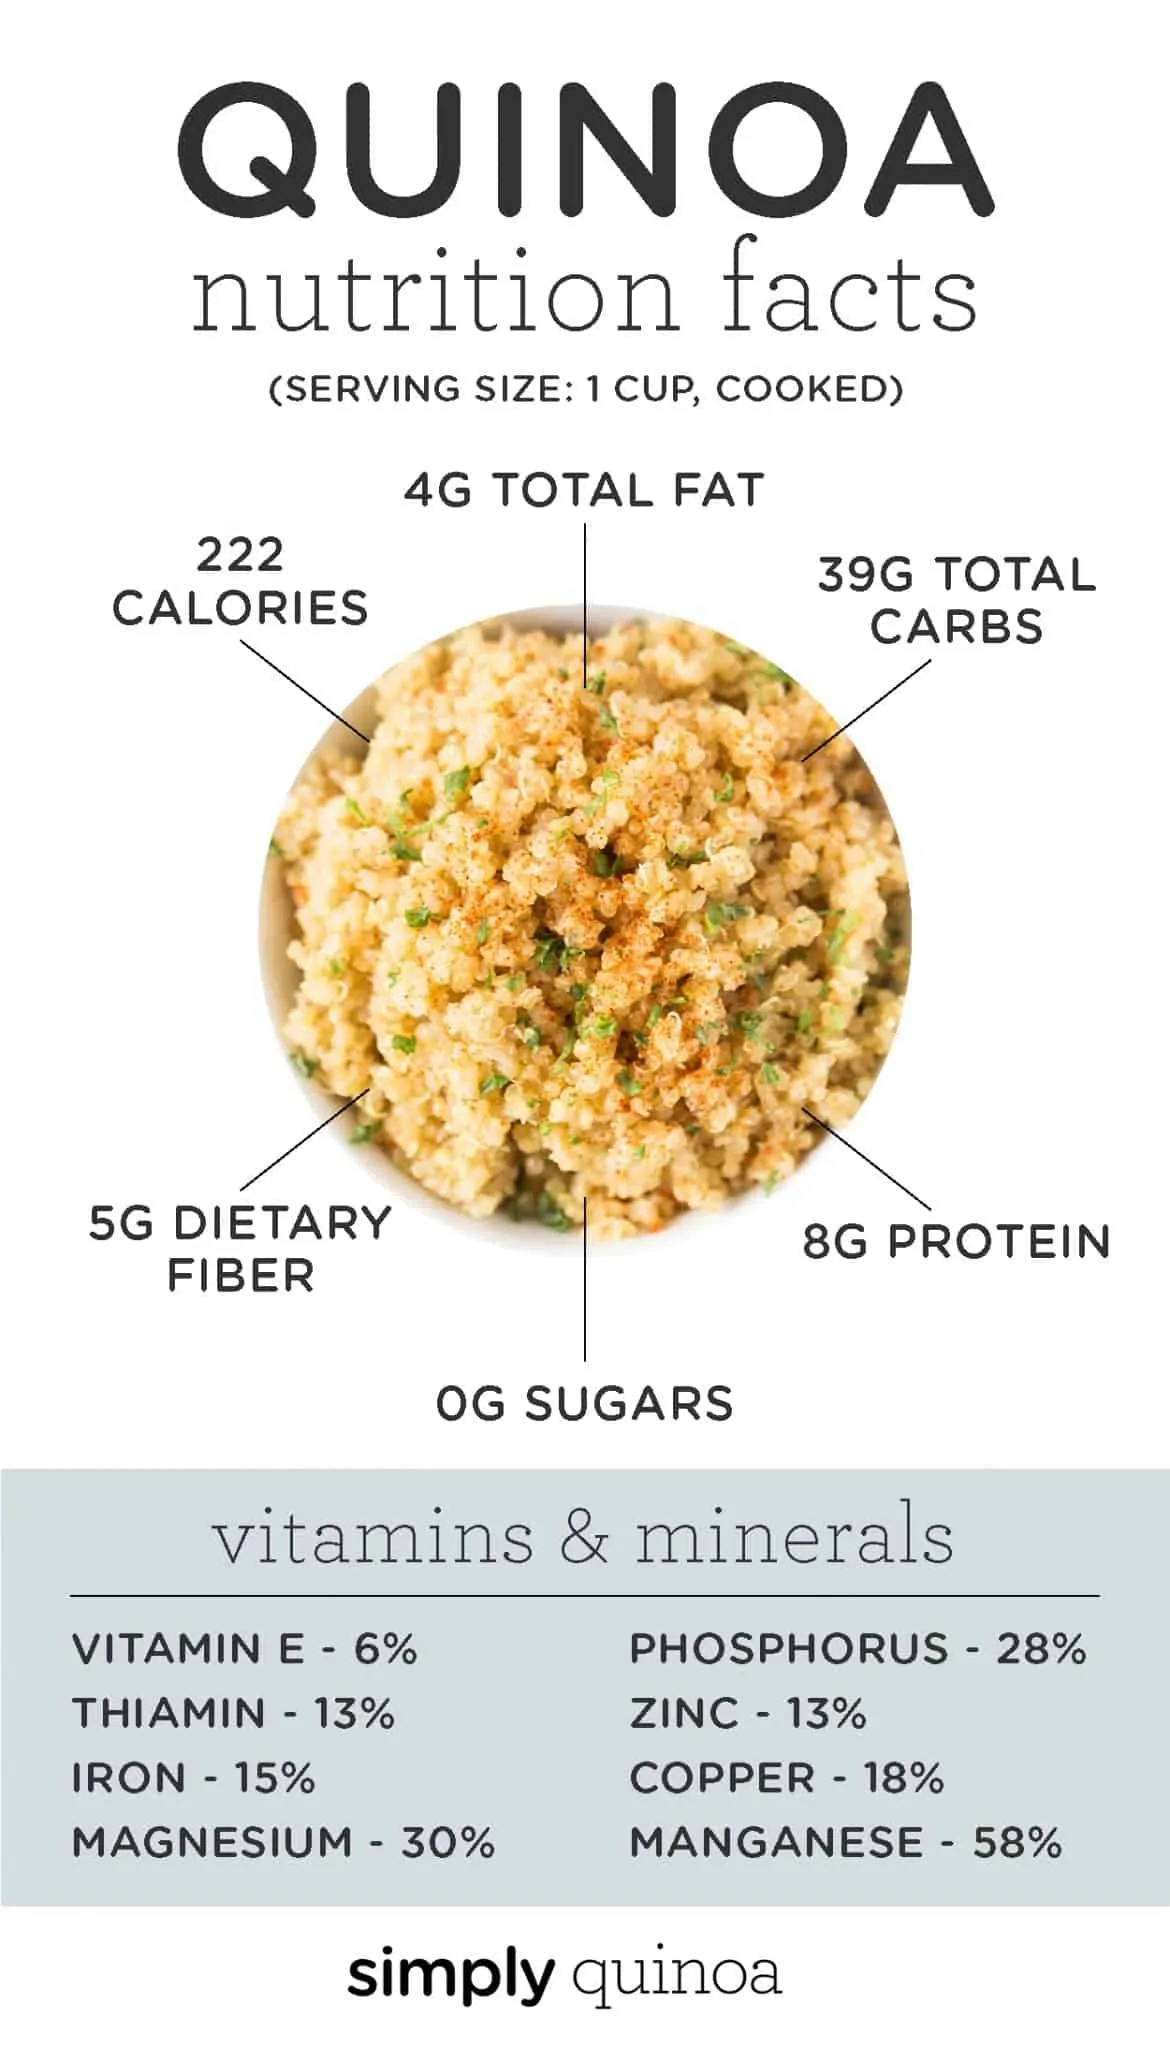 A graphic showing the the health benefits of quinoa that reads "Quinoa nutrition facts (serving size: 1 cup, cooked): 4g total fat; 39g total carbs; 8g protein; 0g sugars; 5g dietary fiber; 222 calories," with the vitamin and mineral information below it